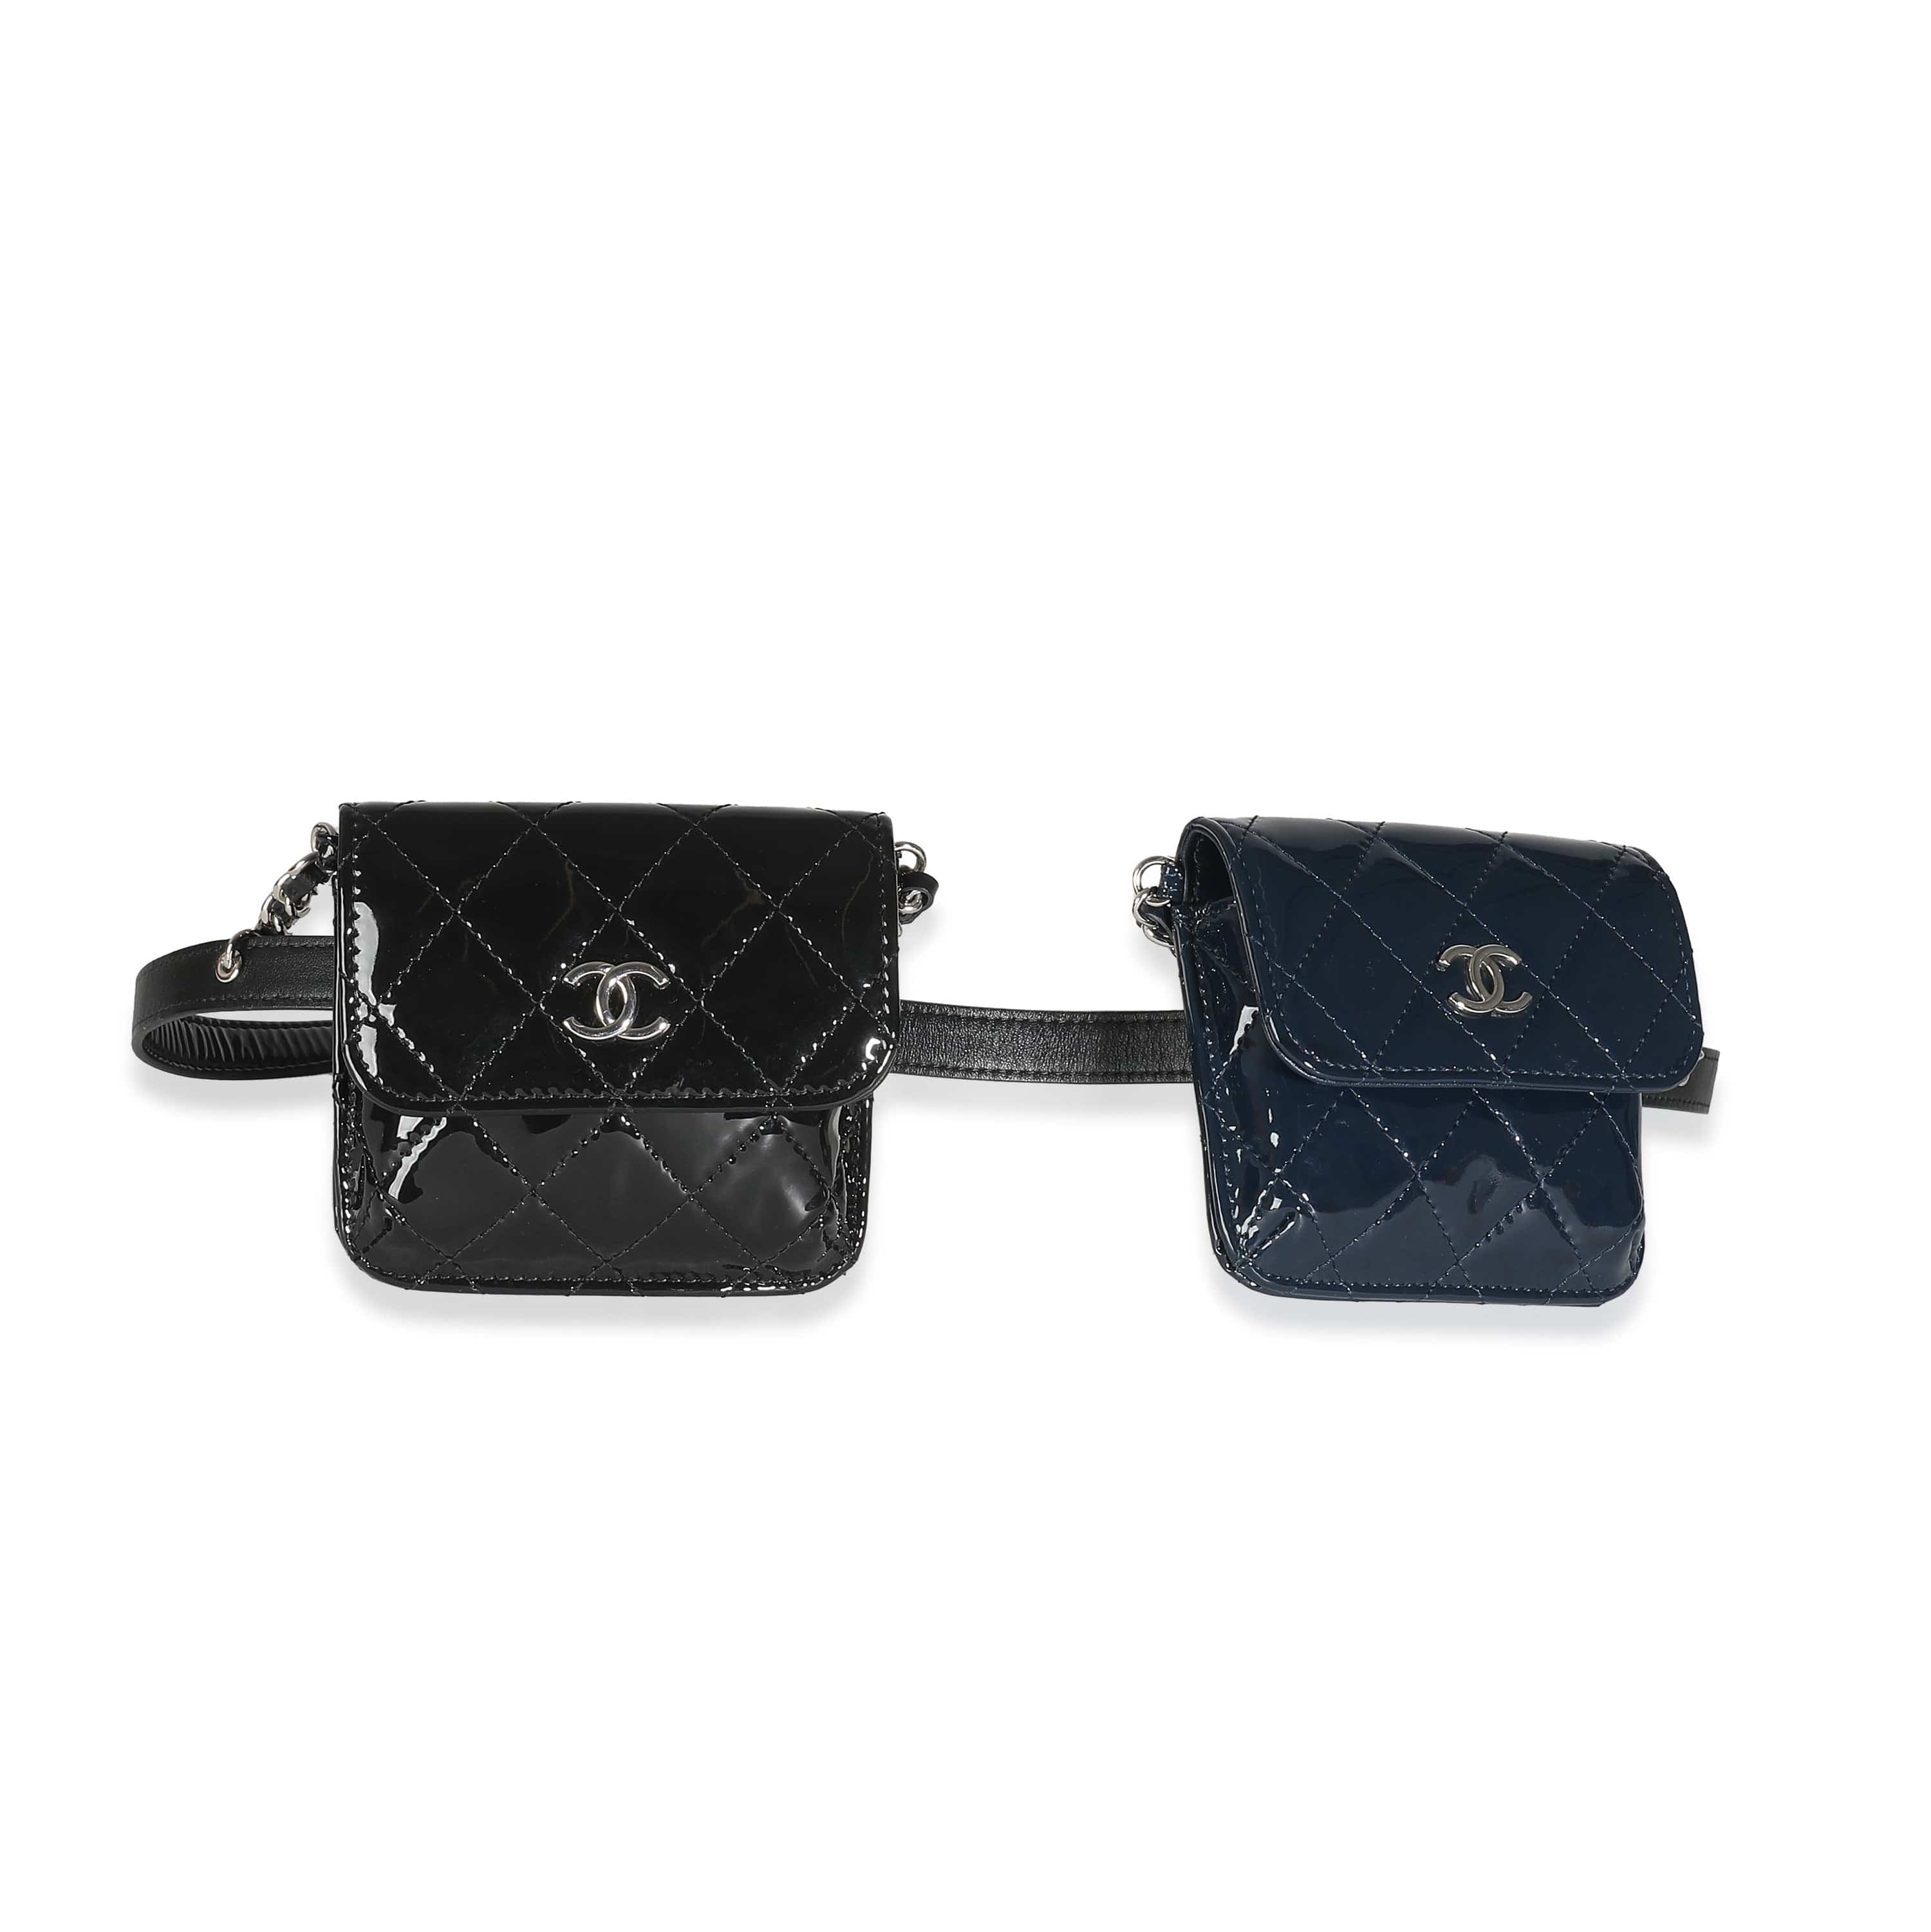 Chanel Chanel Black Navy Quilted Patent CC Double Chain Mini Waist Bag